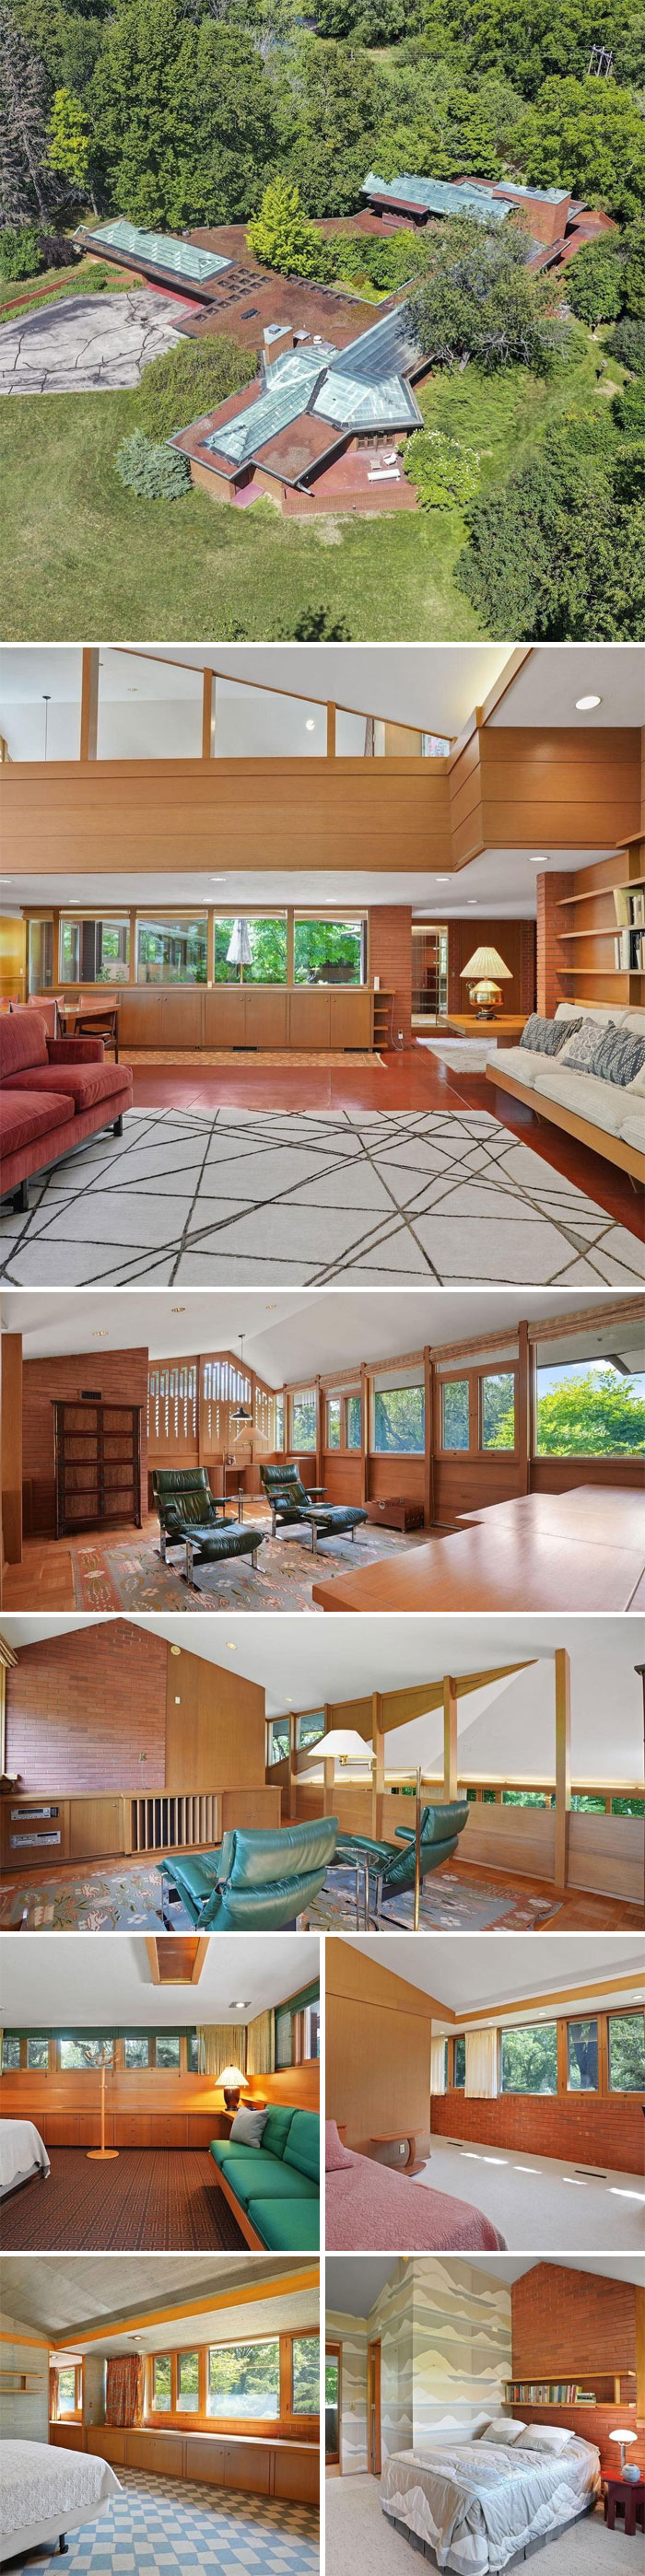 For Todays #zgwtbt, I Bet You Didn’t Wake Up Today And Think You Were Going To Be Moving To Mount Pleasant, Wi But There Is A Frank Lloyd Wright Home There For $725,000 With Your Name On It. 6 Bd, 7 Ba. 4,978 Sq Ft. 3.2 Acres